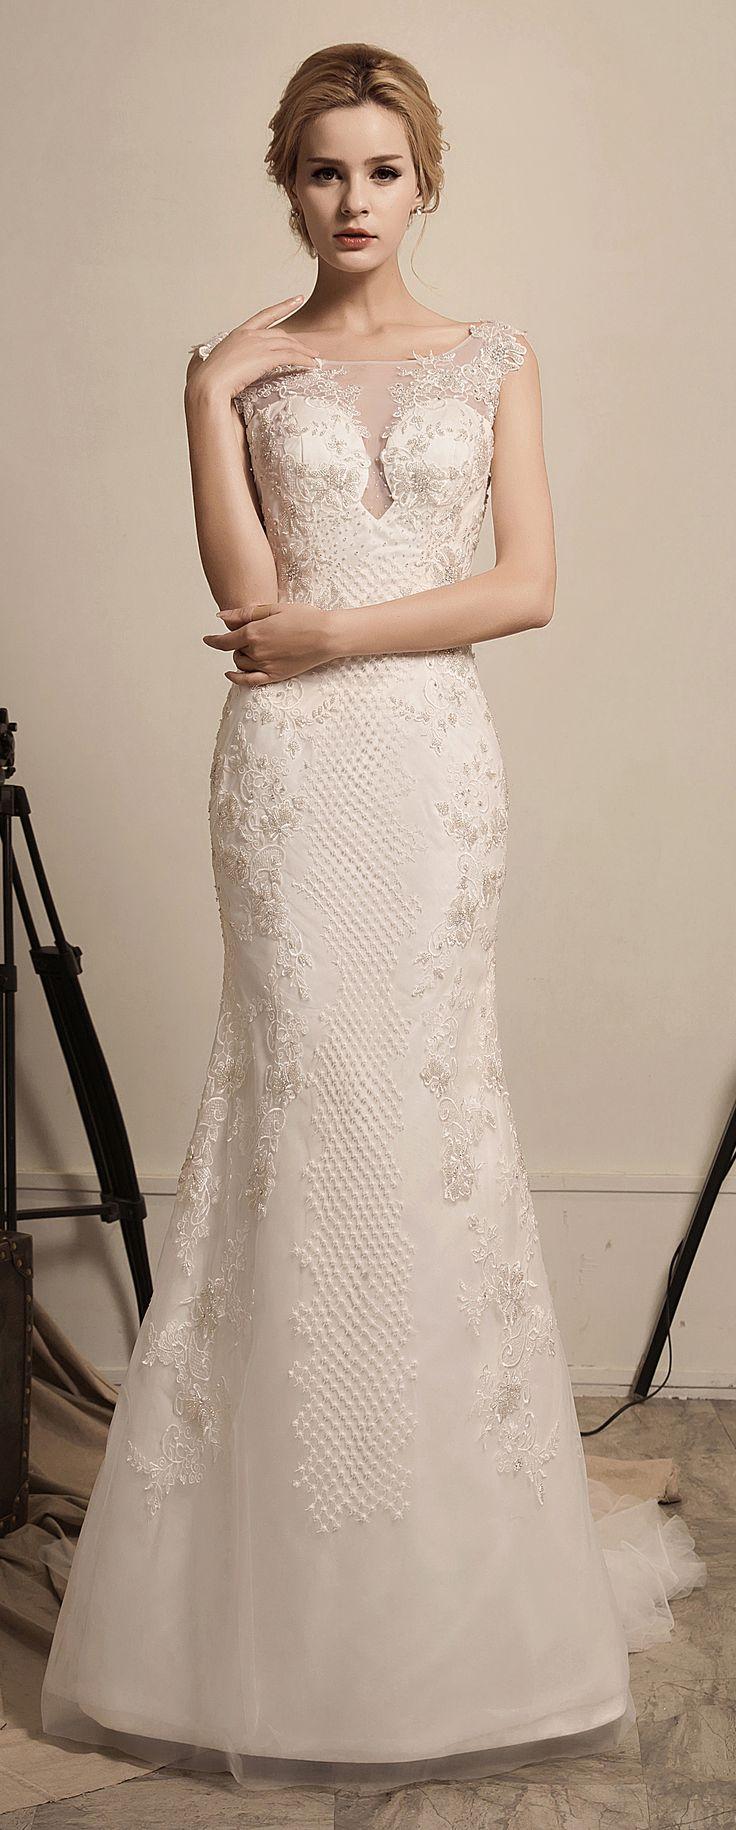 Mariage - Fairy Queen - Selena Huan Tank Silver Water Soluble Lace Beaded Sheath Gown With Detachable Layered Train